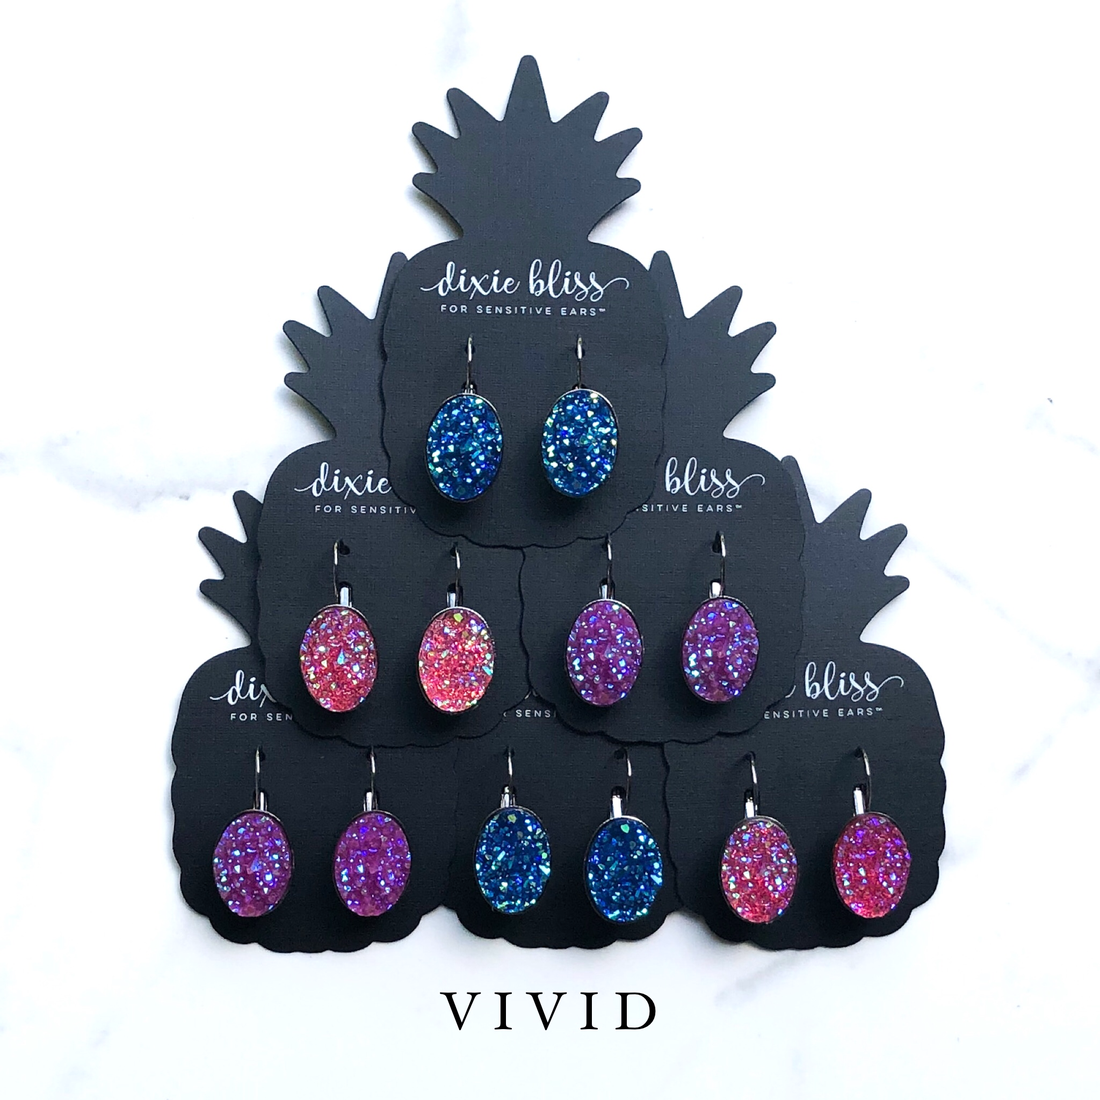 Dixie Bliss Earrings:  Vivid Lever Backs In Blue, Pink, and Purple. All Hypoallergenic made in the USA woman-owned company druzy shiny diamond-like sparkle and shine safe & made for sensitive ears